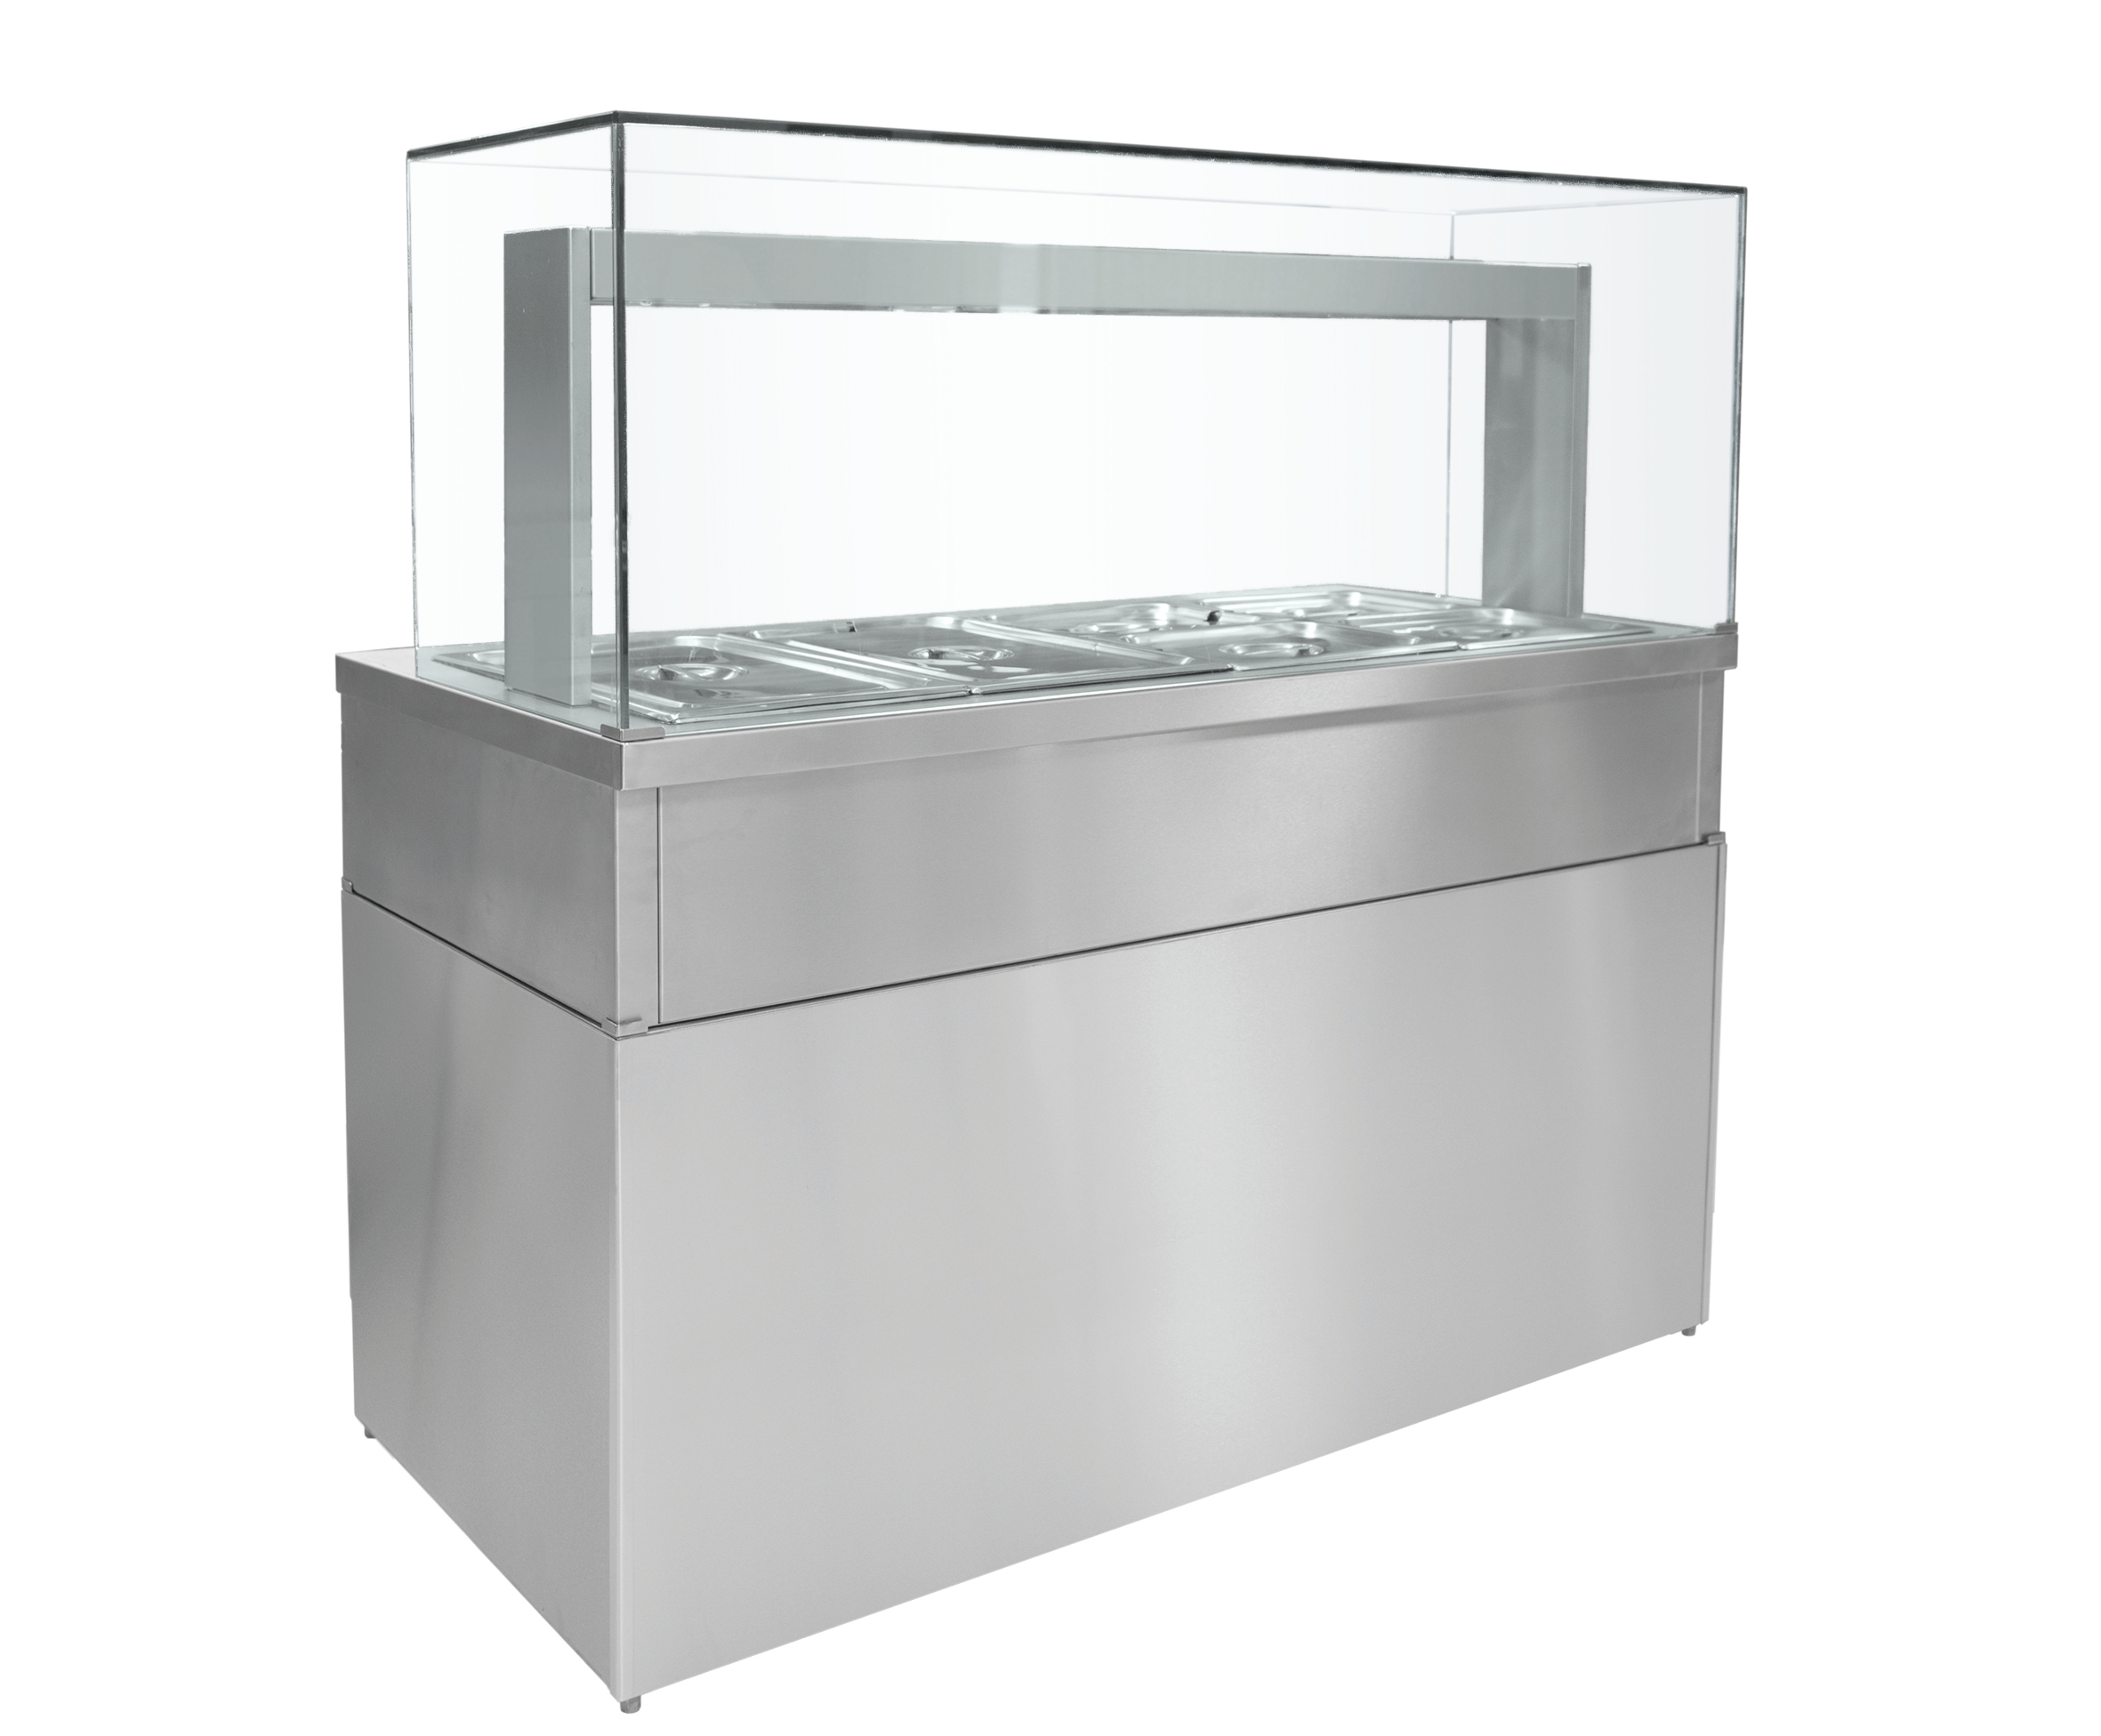 Parry Heated Bain Marie 5 Pot Servery with Glass HGBM5